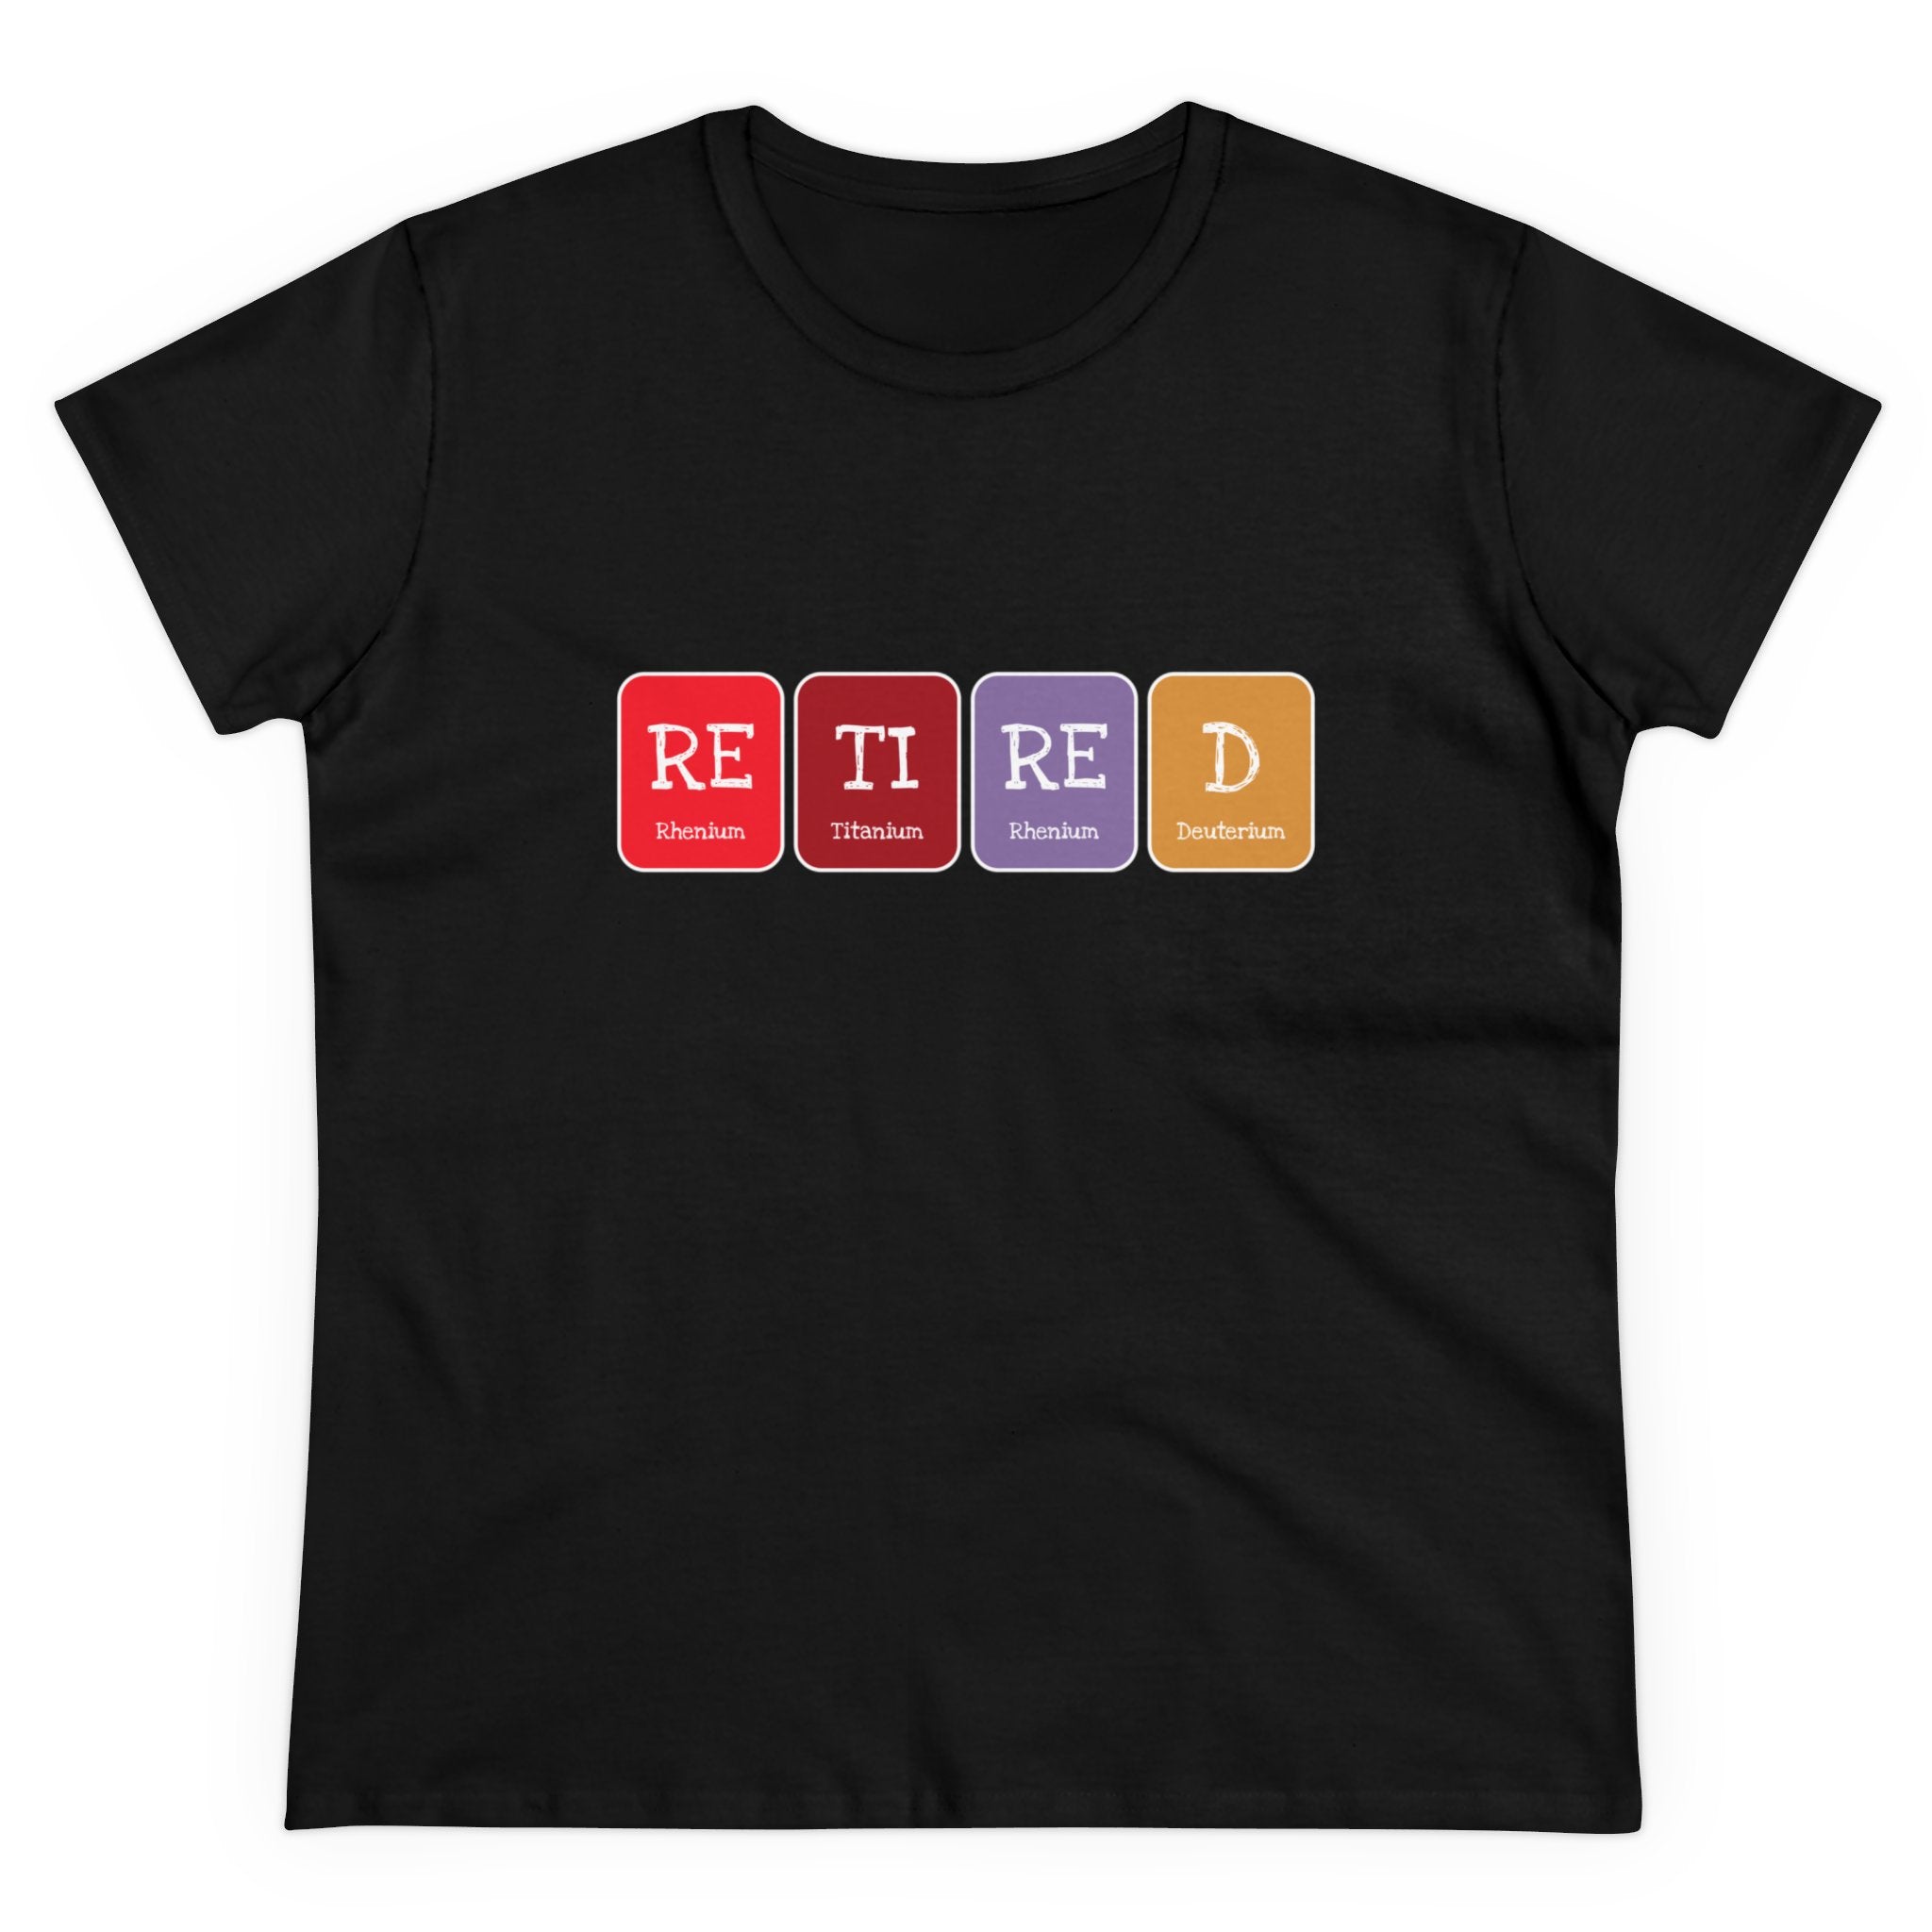 Retired - Women's Tee: Black T-shirt with multicolored Scrabble tiles spelling "RETIRED" in red, black, purple, and gold. Experience unmatched comfort and style.